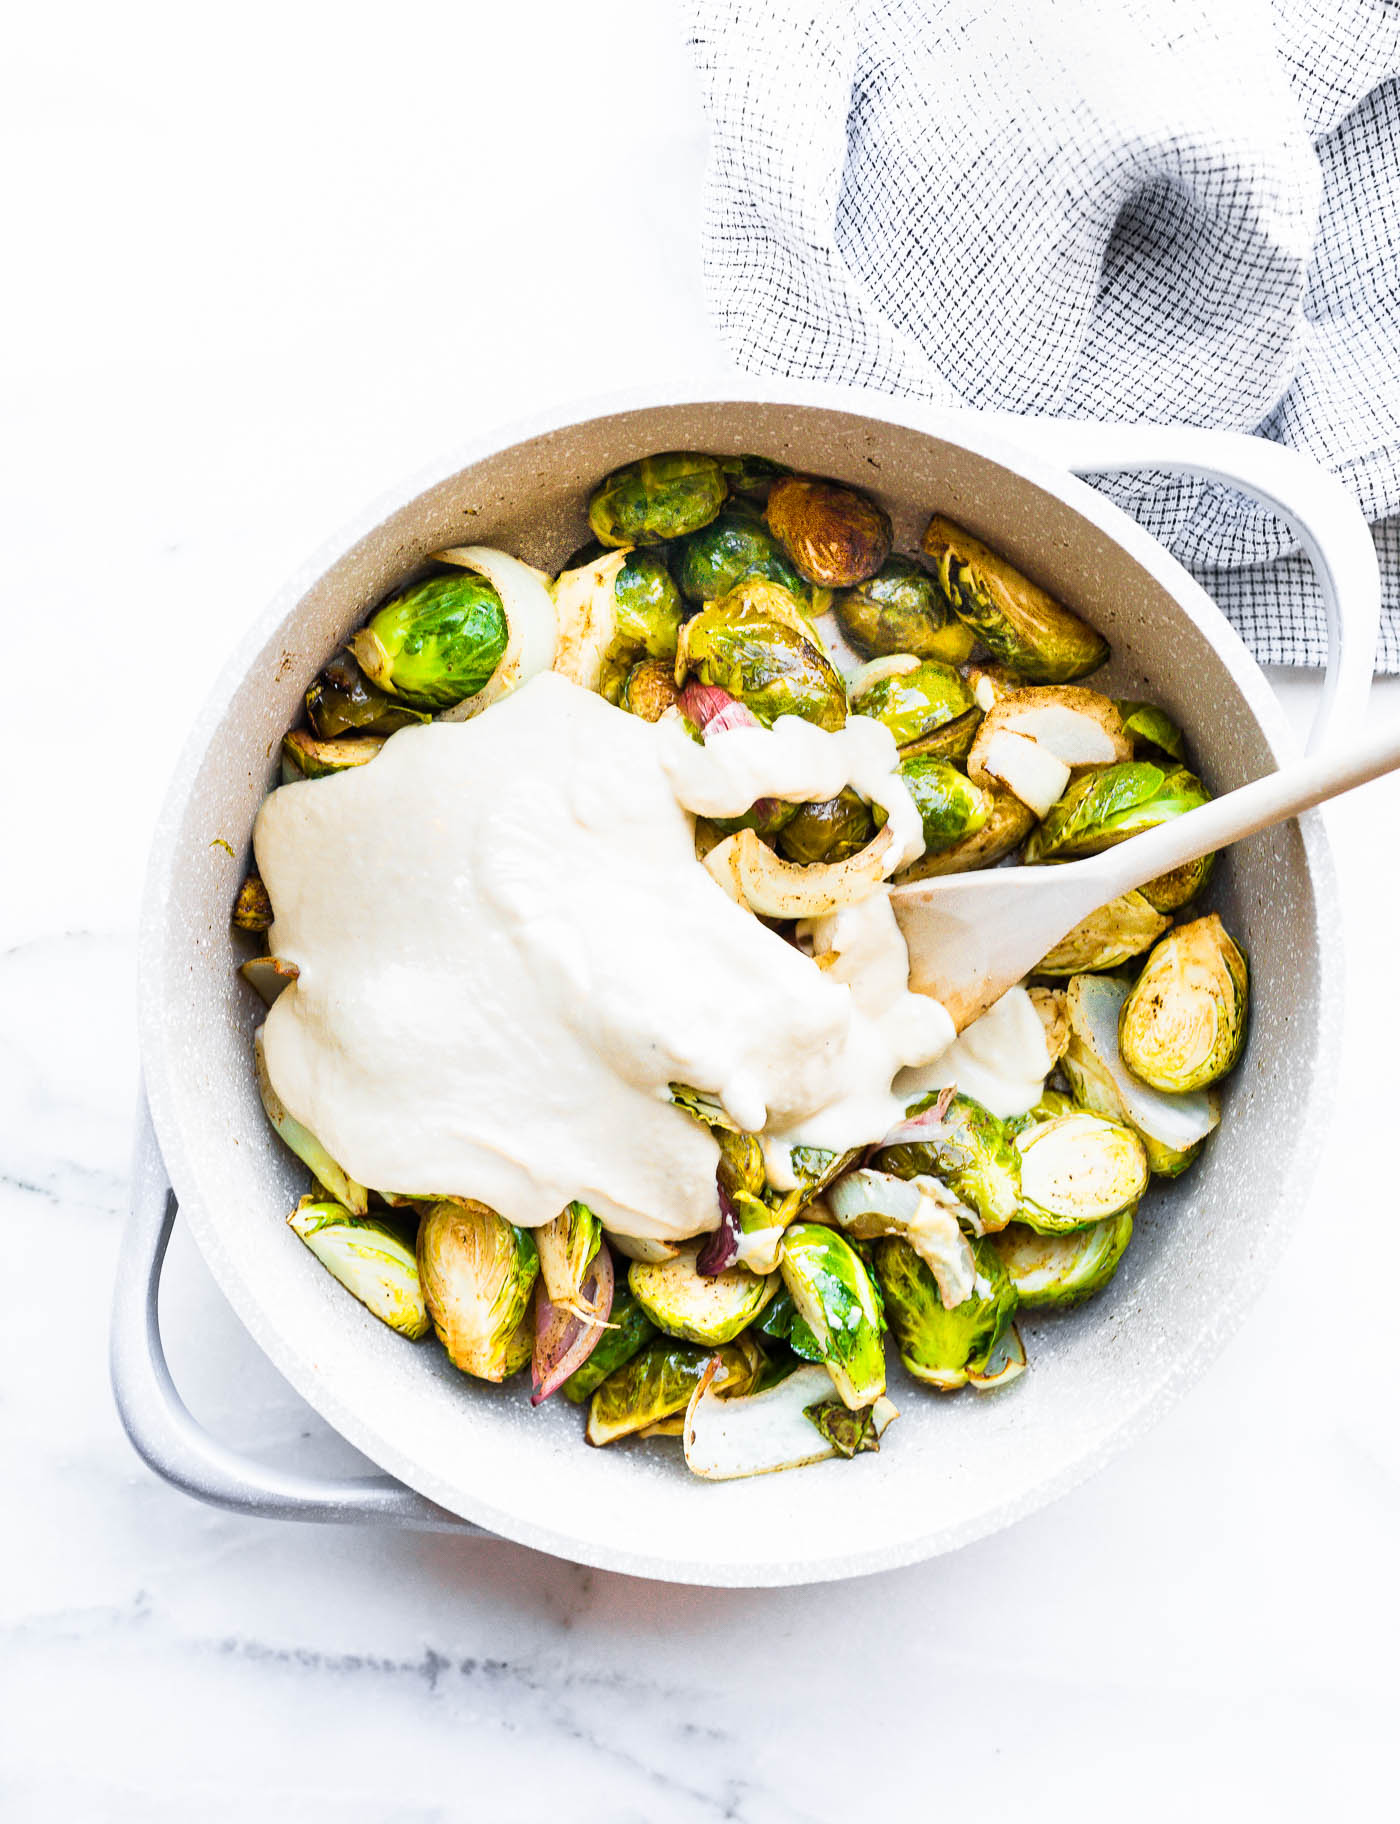 Creamy Mustard sauteed Brussel Sprouts Salad! A Brussel Sprouts salad tossed in a vegan creamy mustard cashew sauce. It's an easy to make holiday side dish! #paleo #vegan #salad #holidays